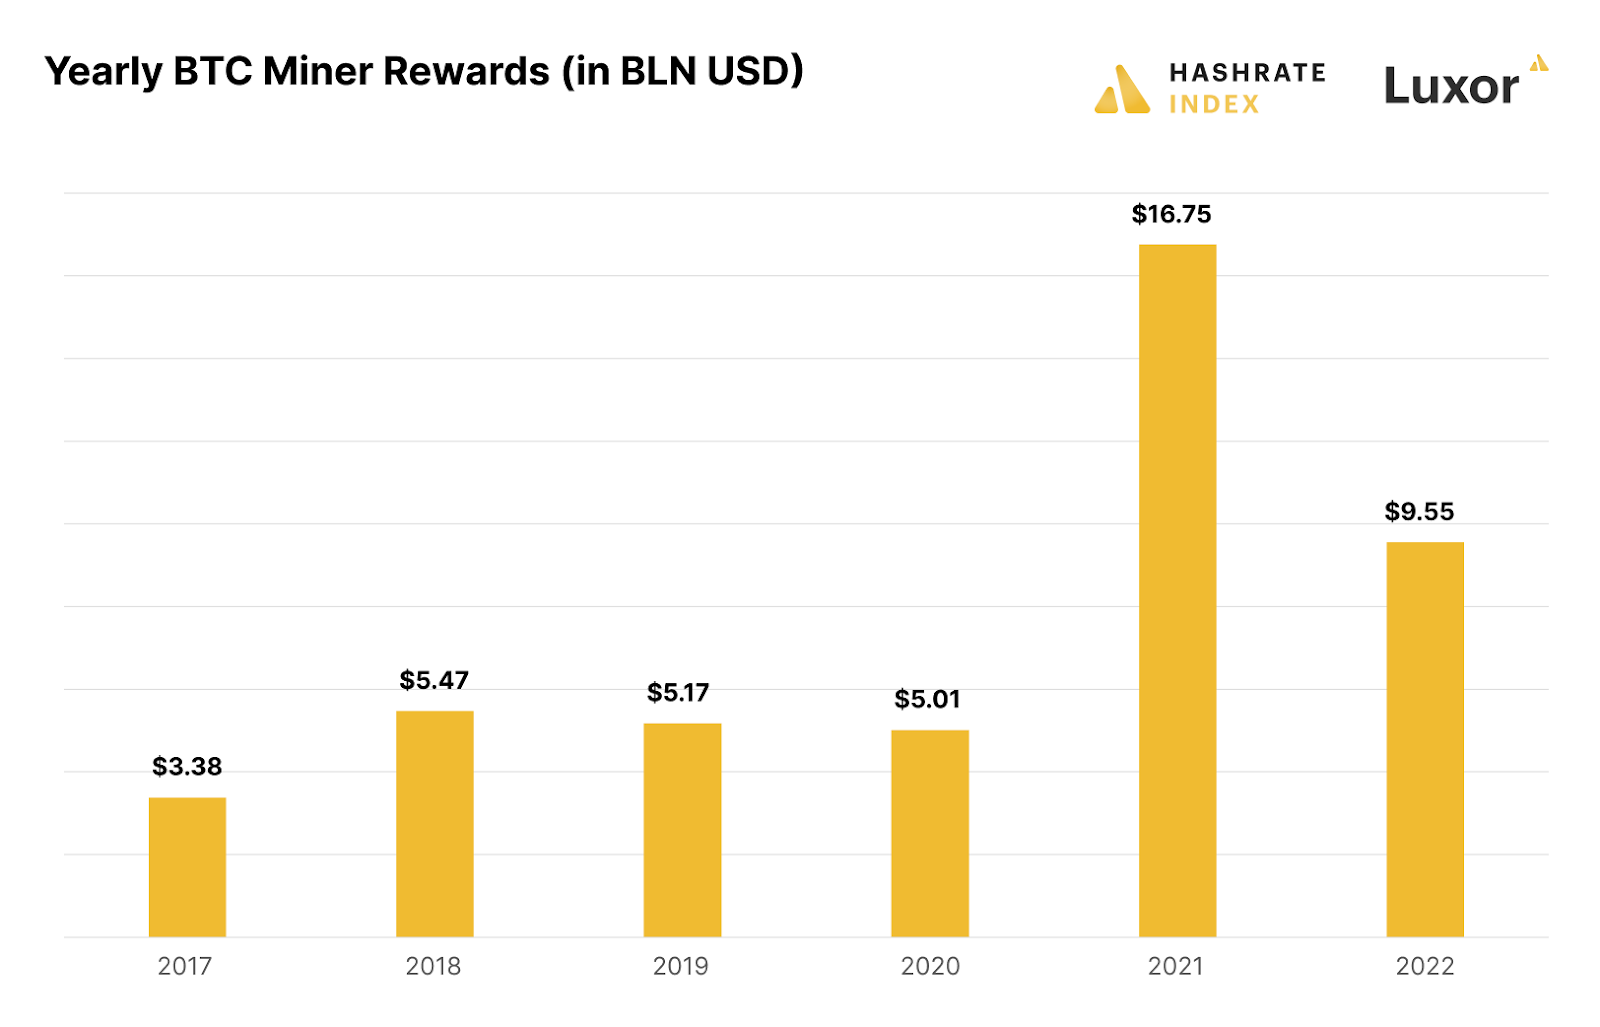 Bitcoin mining yearly rewards in USD 2017, 2018, 2019, 2020, 2021, 2022 | Source: Hashrate Index, Coin Metrics